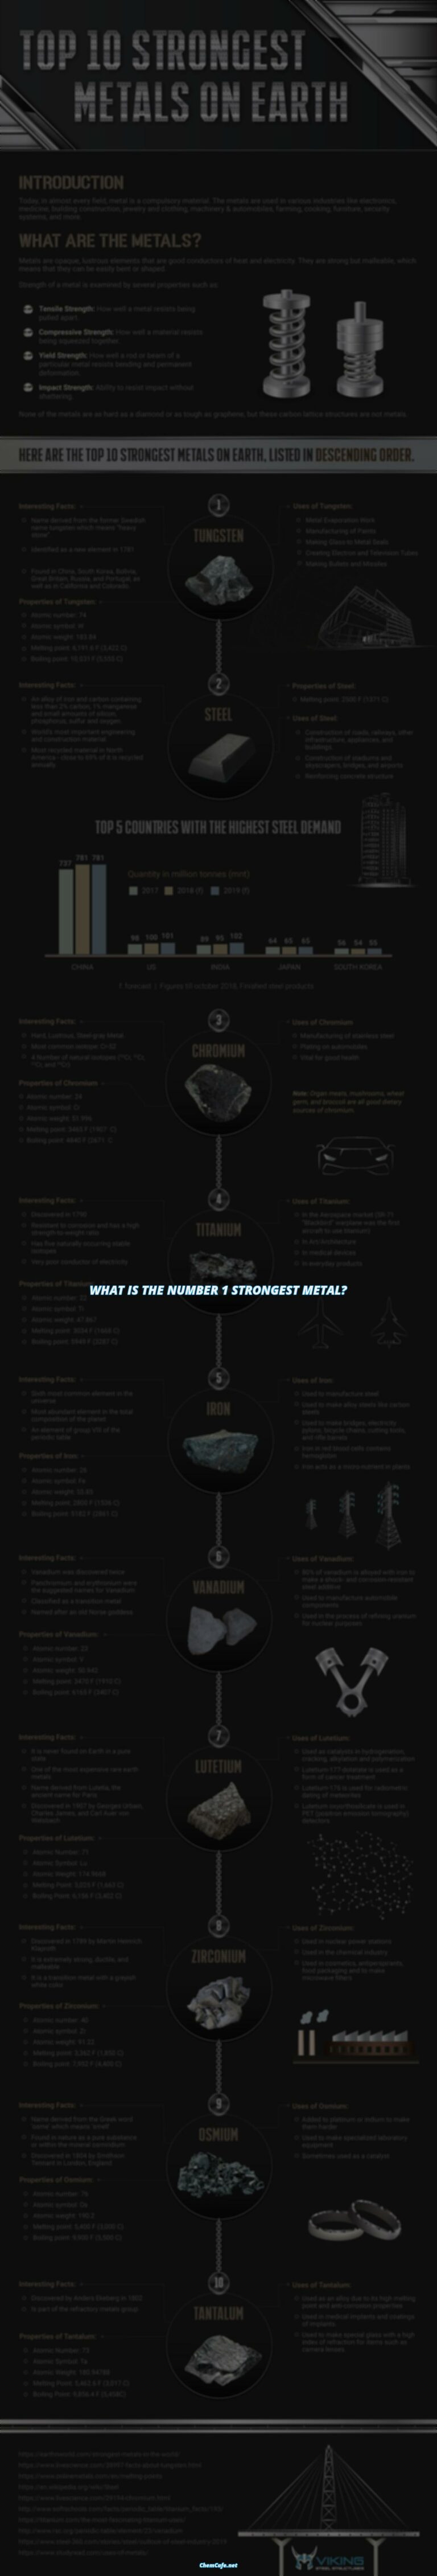 What is the number 1 strongest metal?